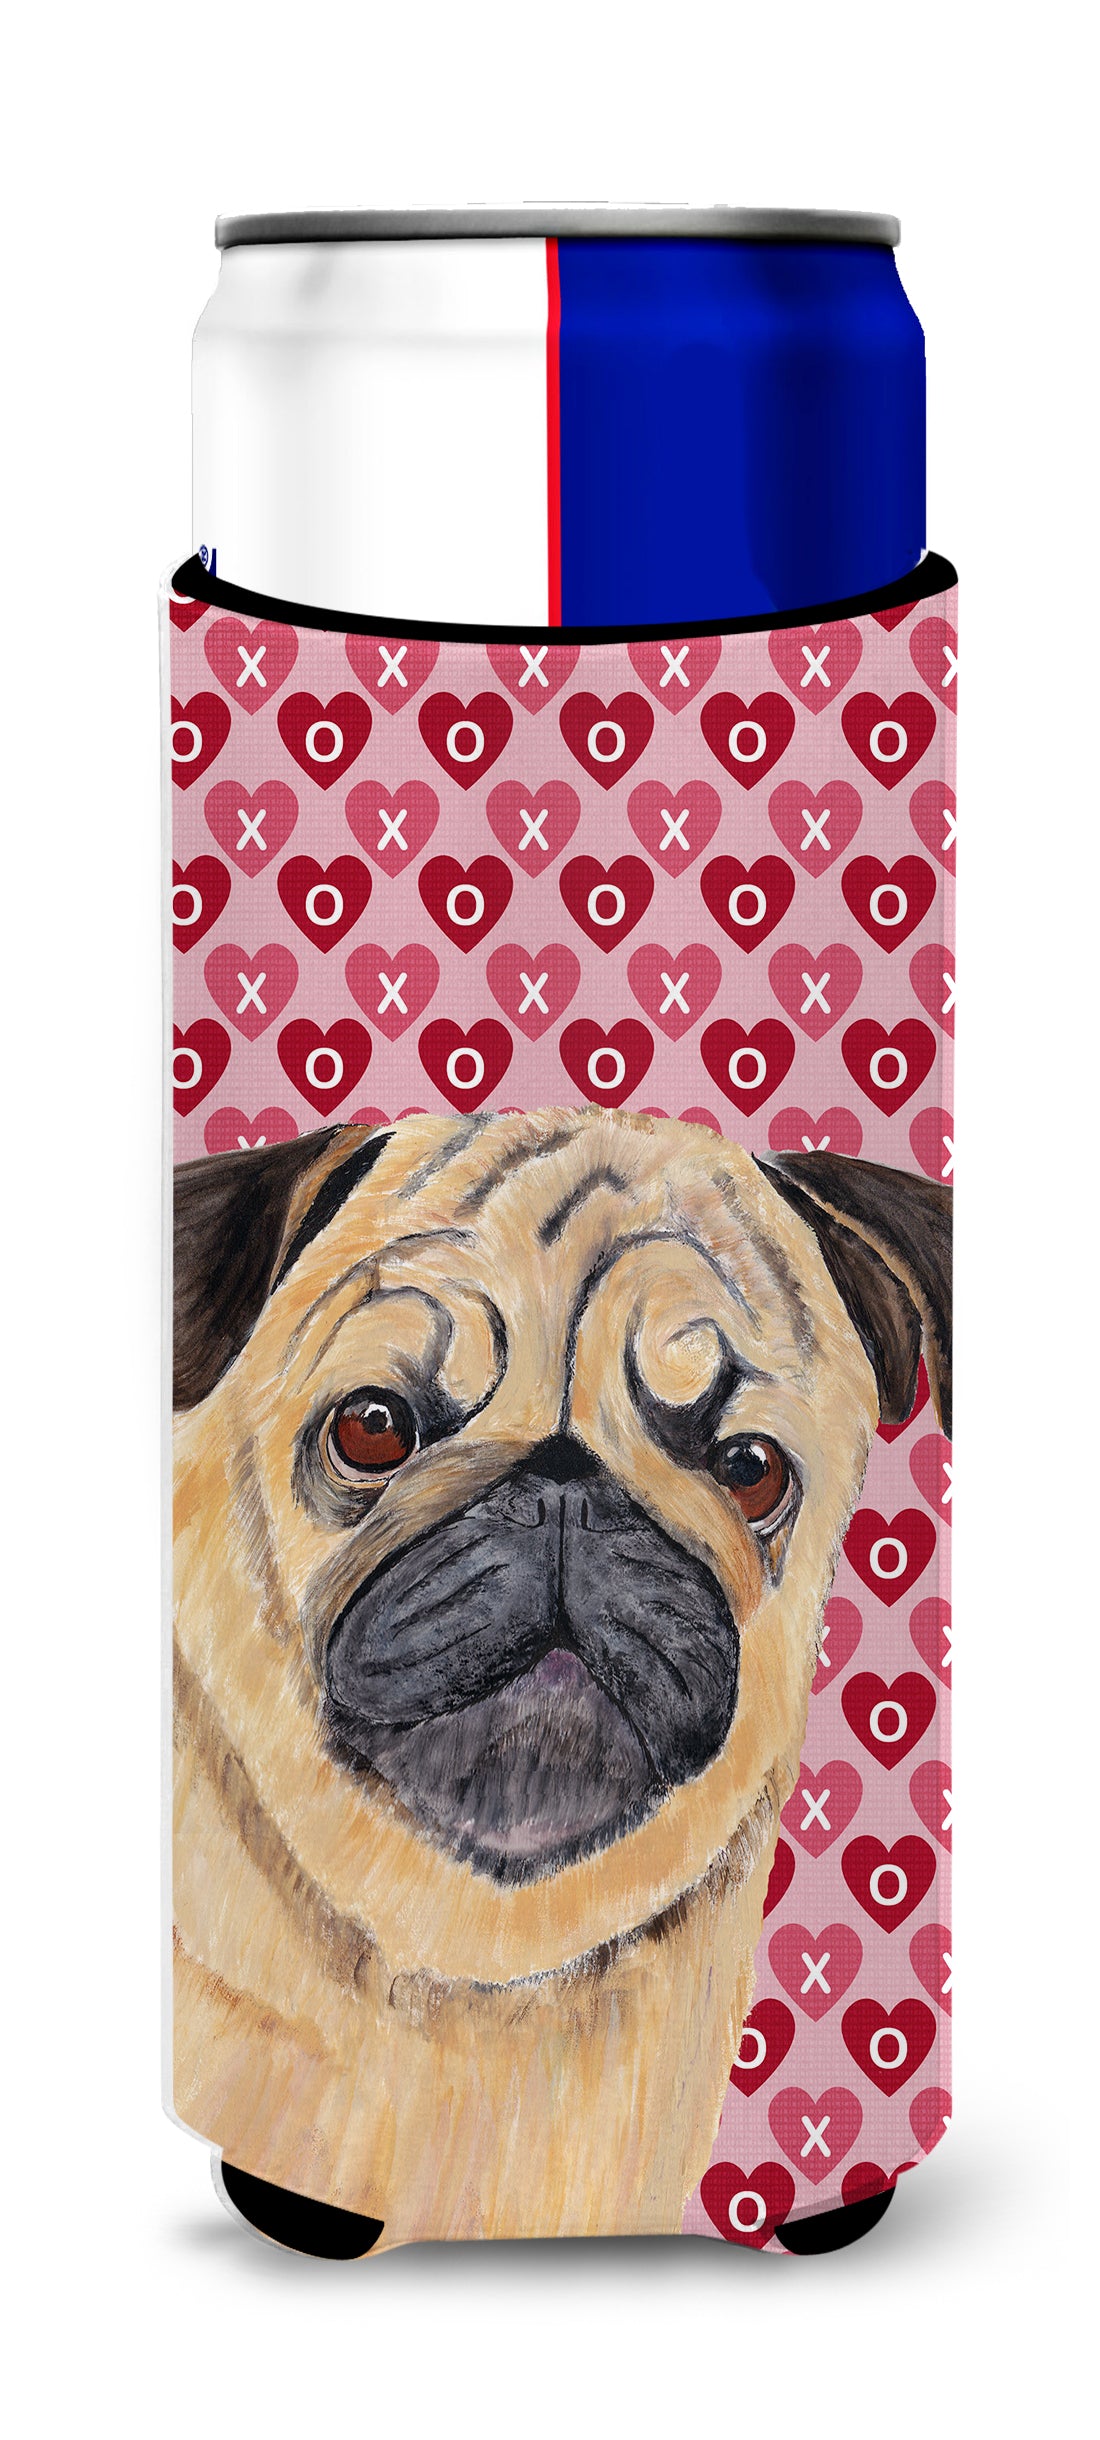 Pug Hearts Love and Valentine's Day Portrait Ultra Beverage Insulators for slim cans SC9268MUK.